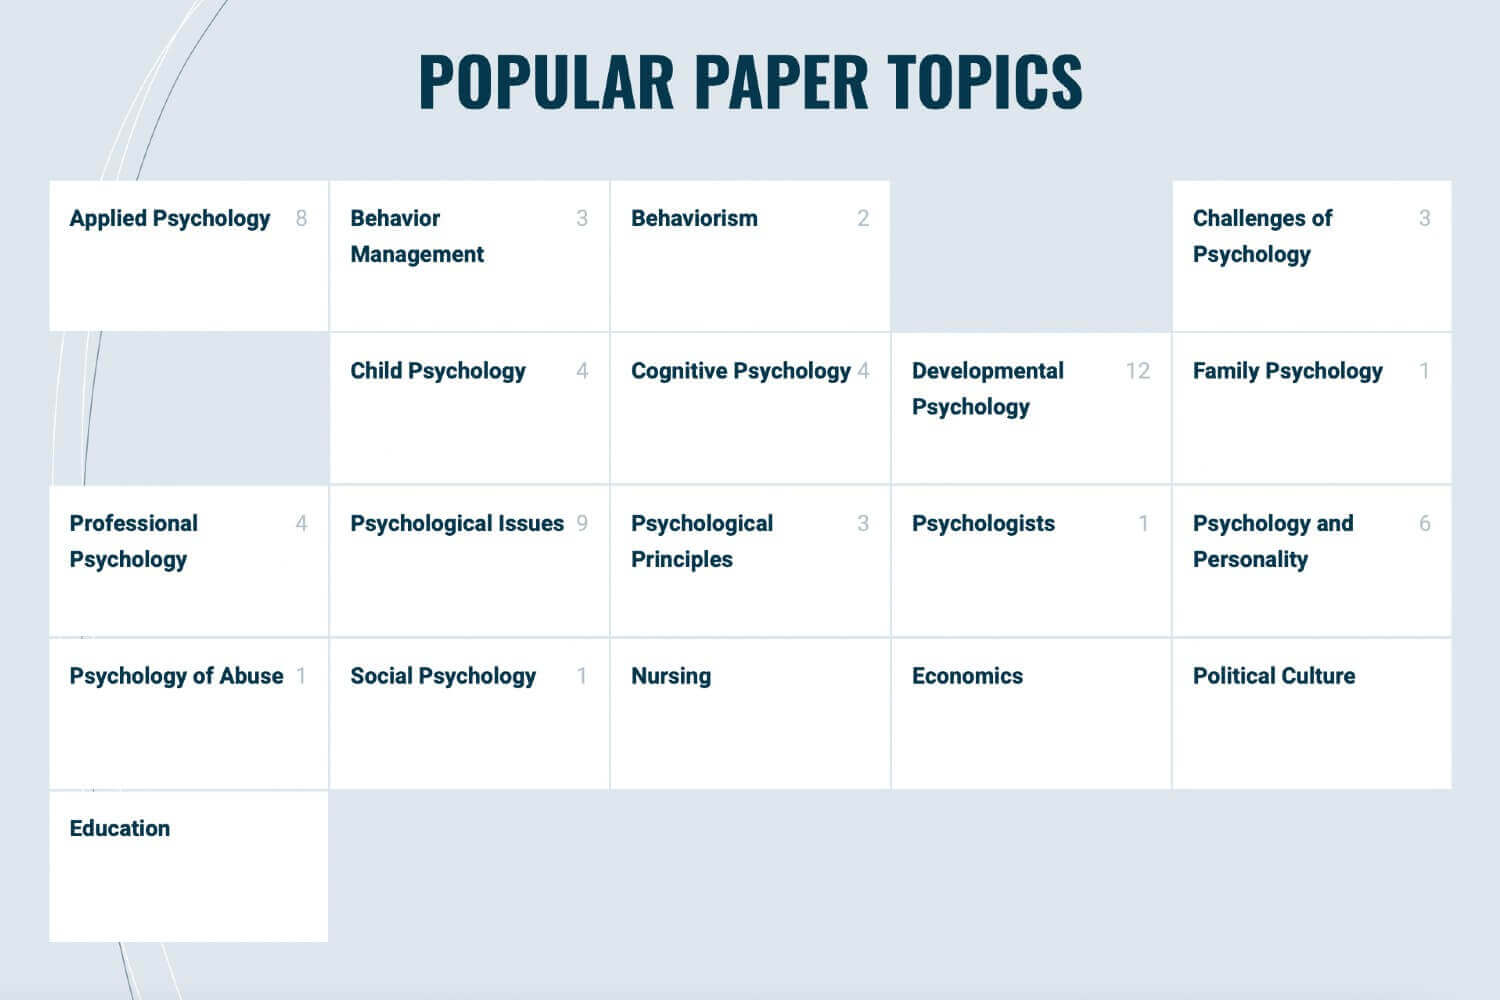 The picture contains a list of essay topics in Essay4Psychology database.